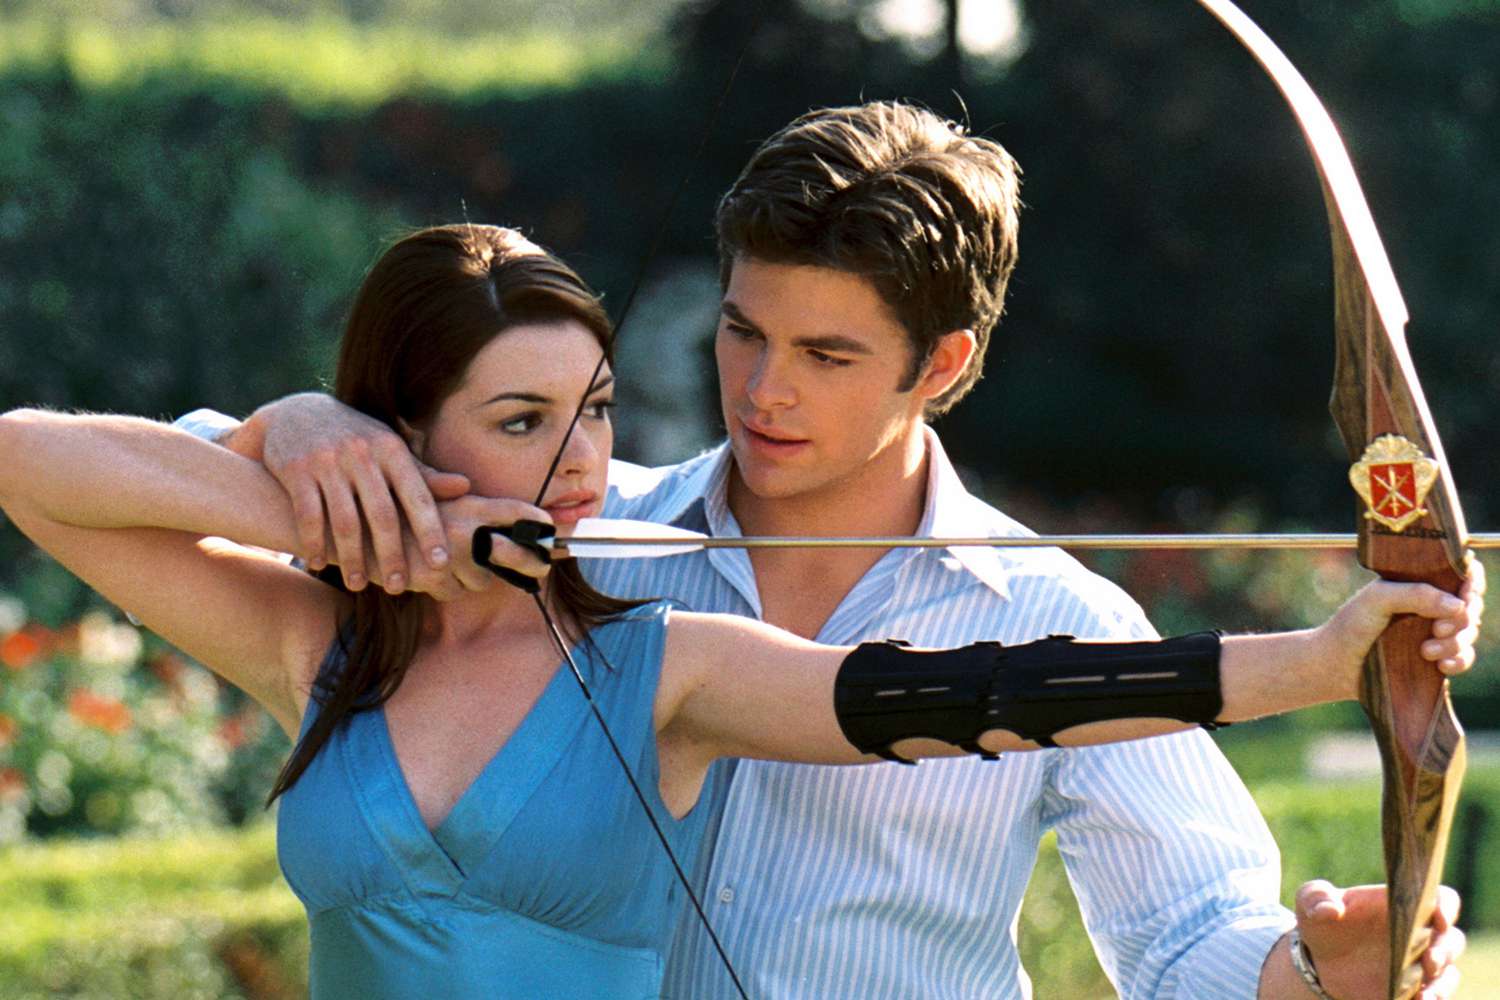 Chris Pine Says He’d Do ‘Princess Diaries 3’ but with a More ‘Low-Profile Hair Helmet’: ‘I’m Here for It